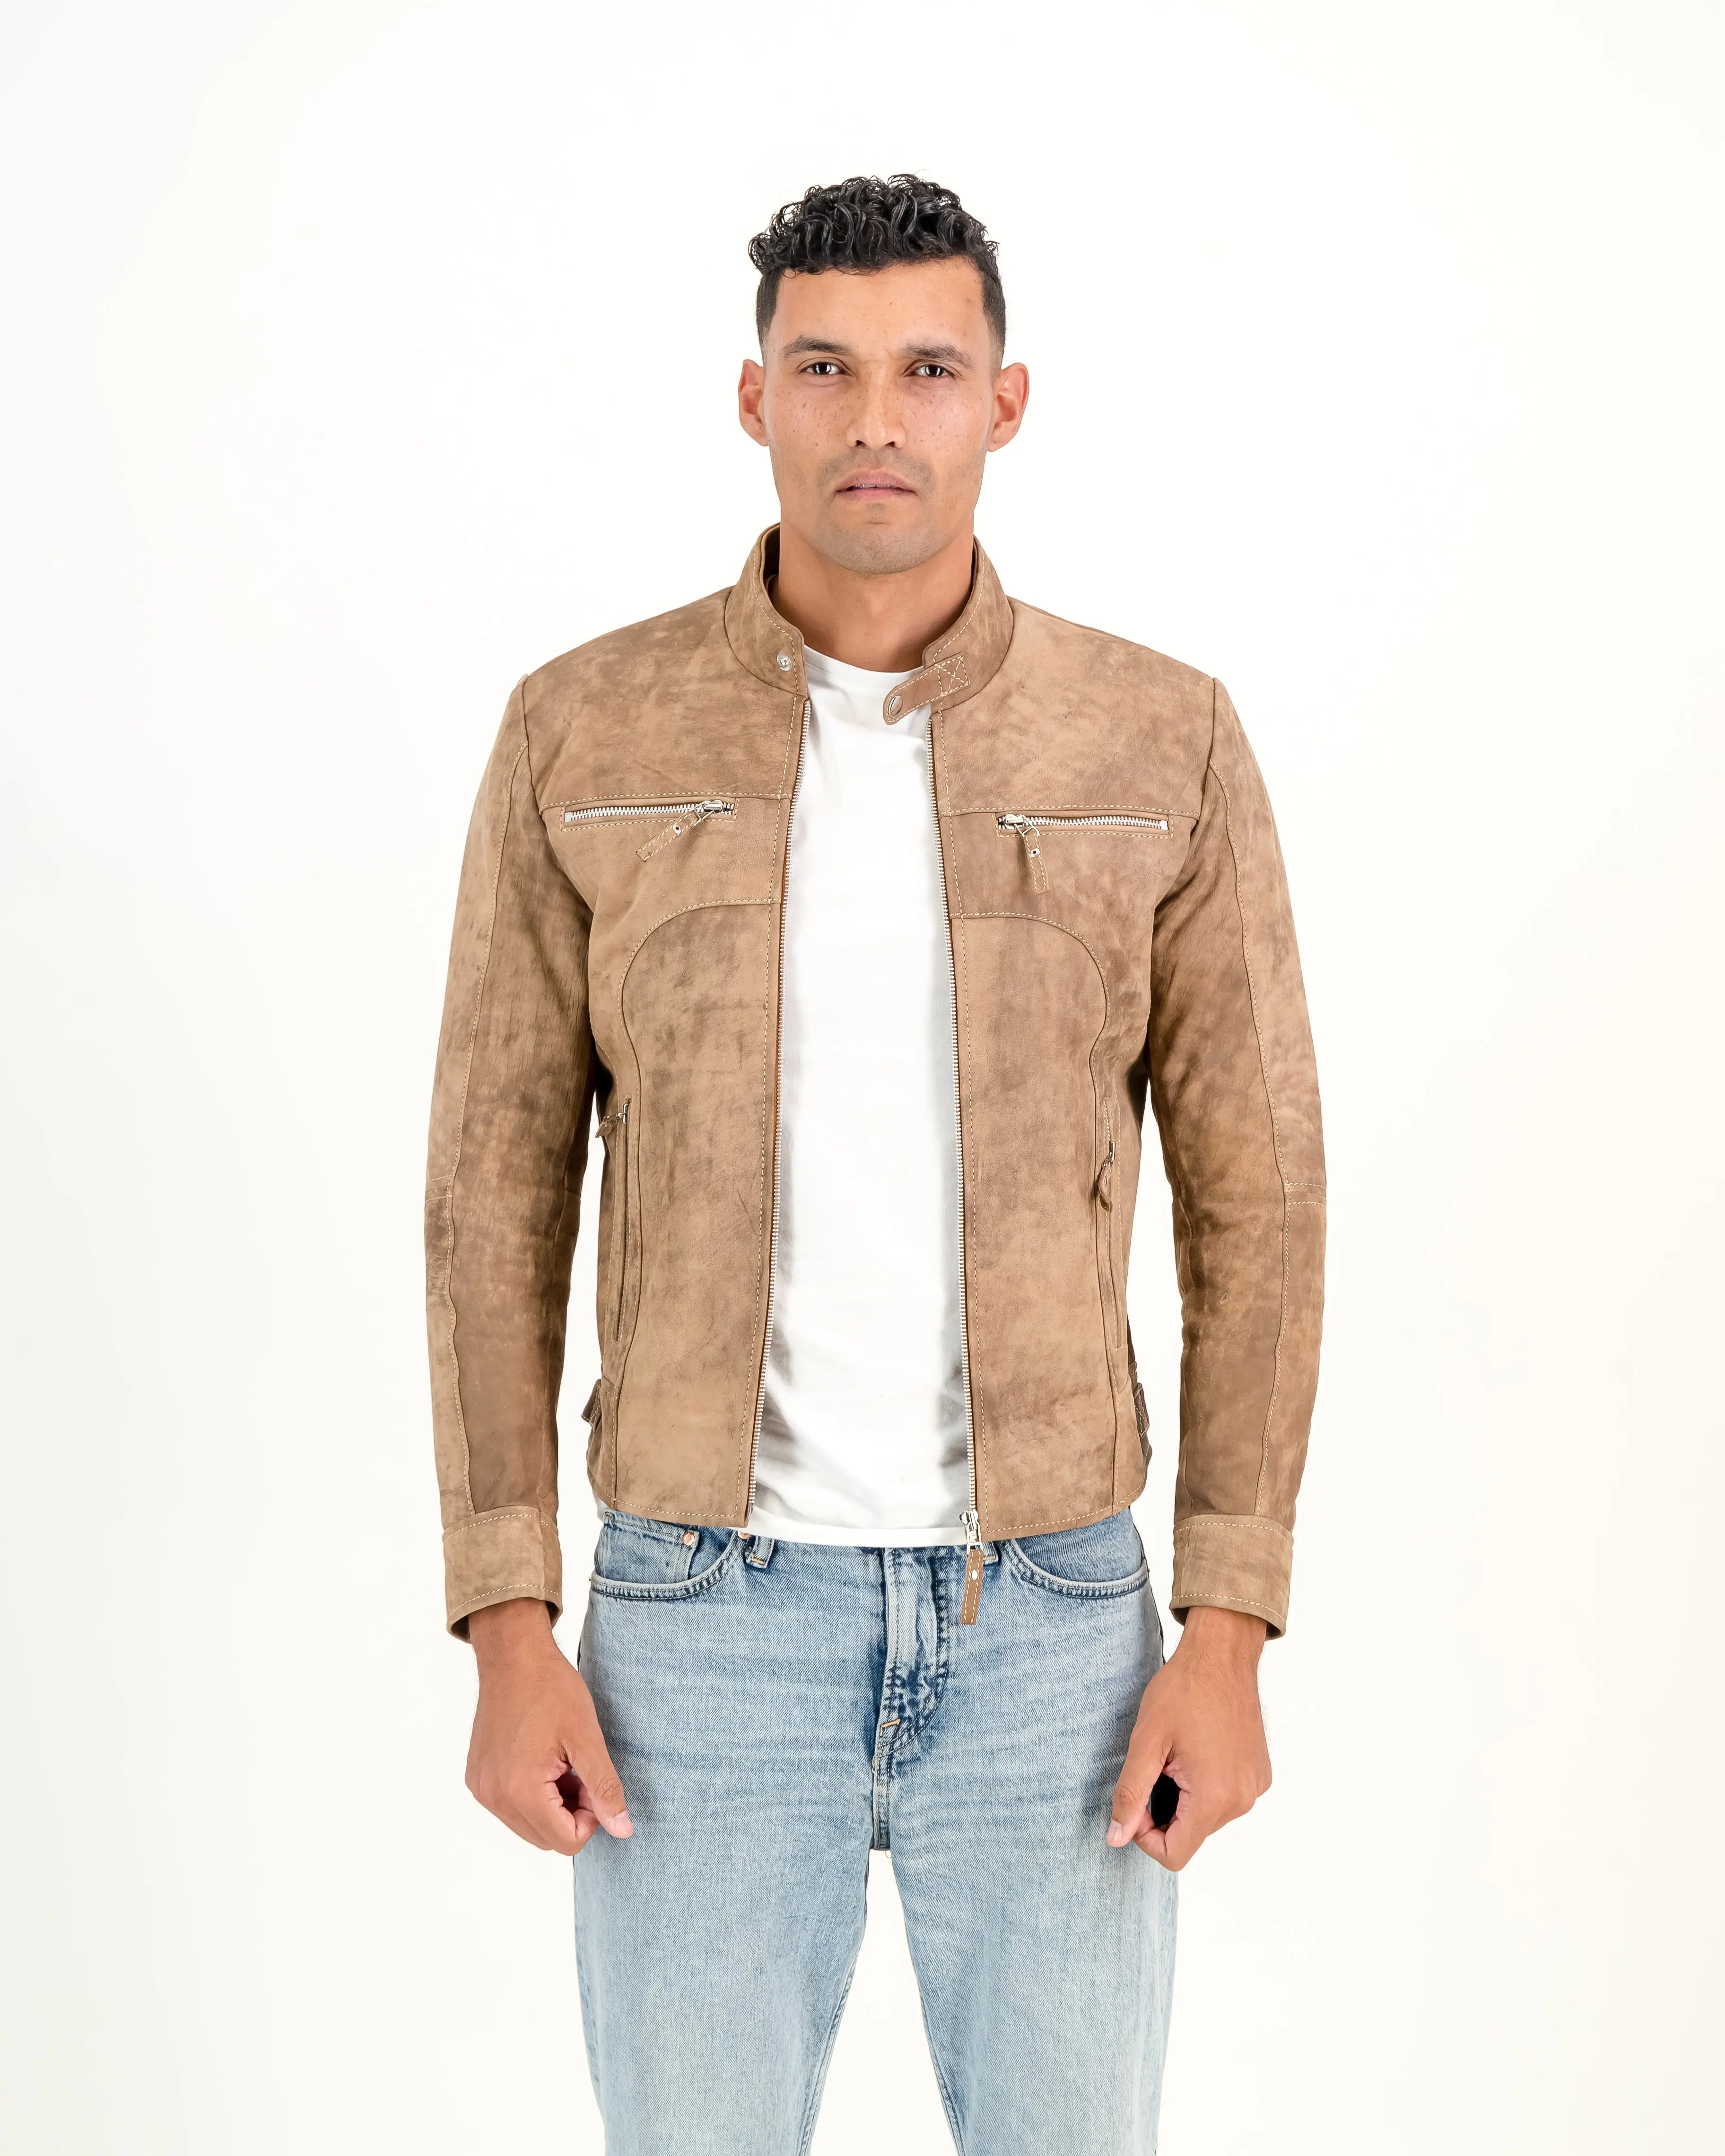 High Quality Solid Faux Leather Jacket For Men at Rs 859.00 | Men Leather  Jackets | ID: 26088517648